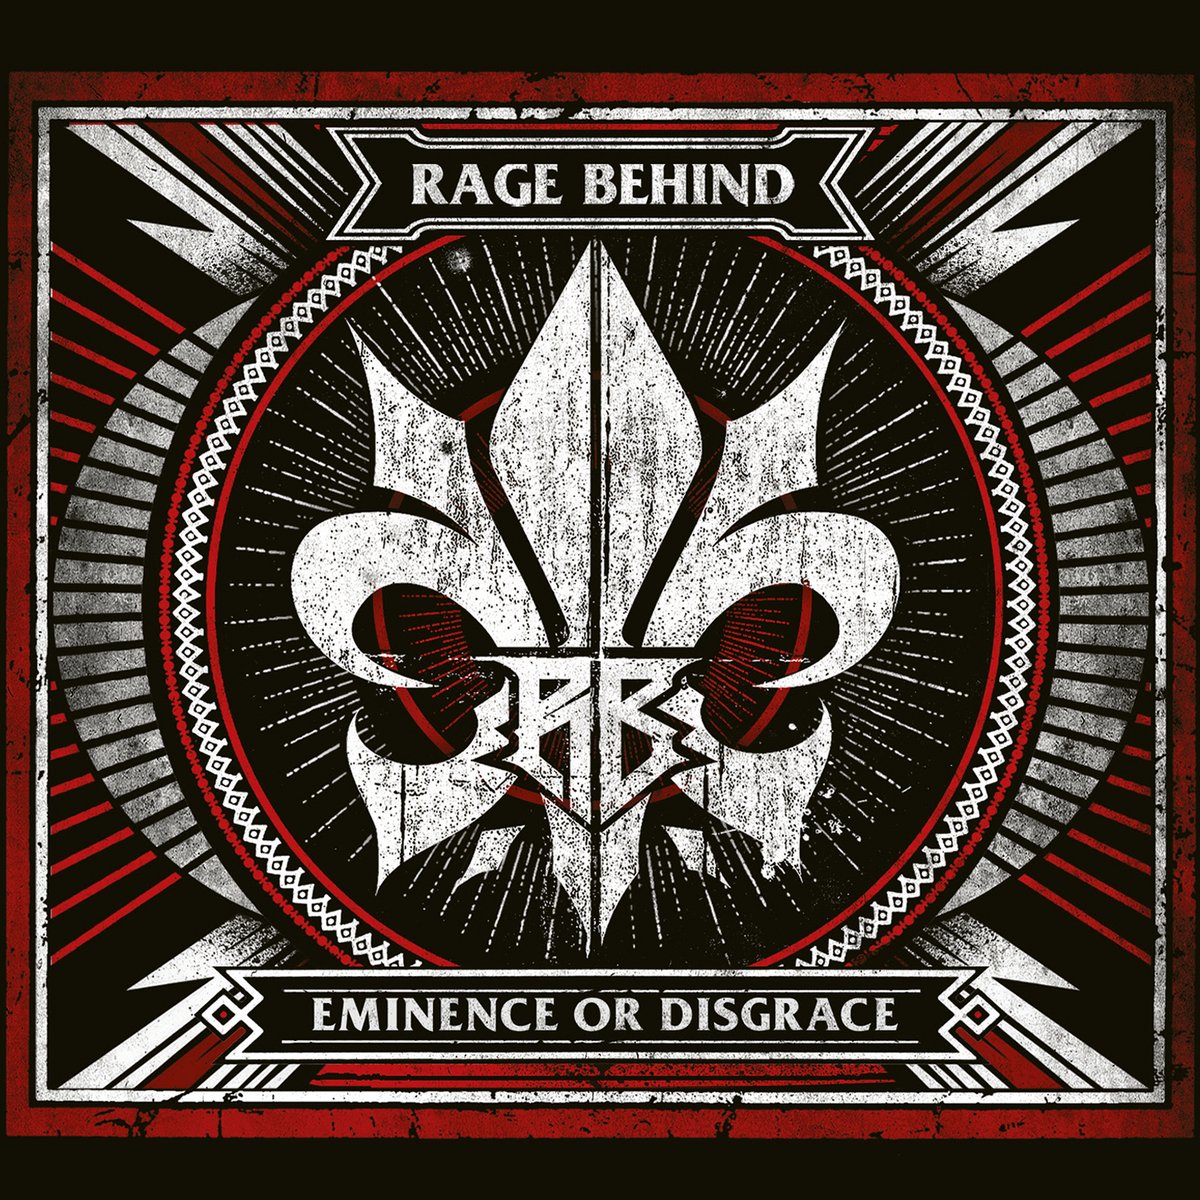 📢In the event it went unnoticed ...™️
RAGE BEHIND Eminence or Disgrace (12/8/23) 🇫🇷
Excellent studio debut full-length effort by the masked French metal collective! Groove/thrash metal, metalcore. Chug!!
All links: ragebehind.afr.link/eminence

2023 ... Ain't over til it's over!